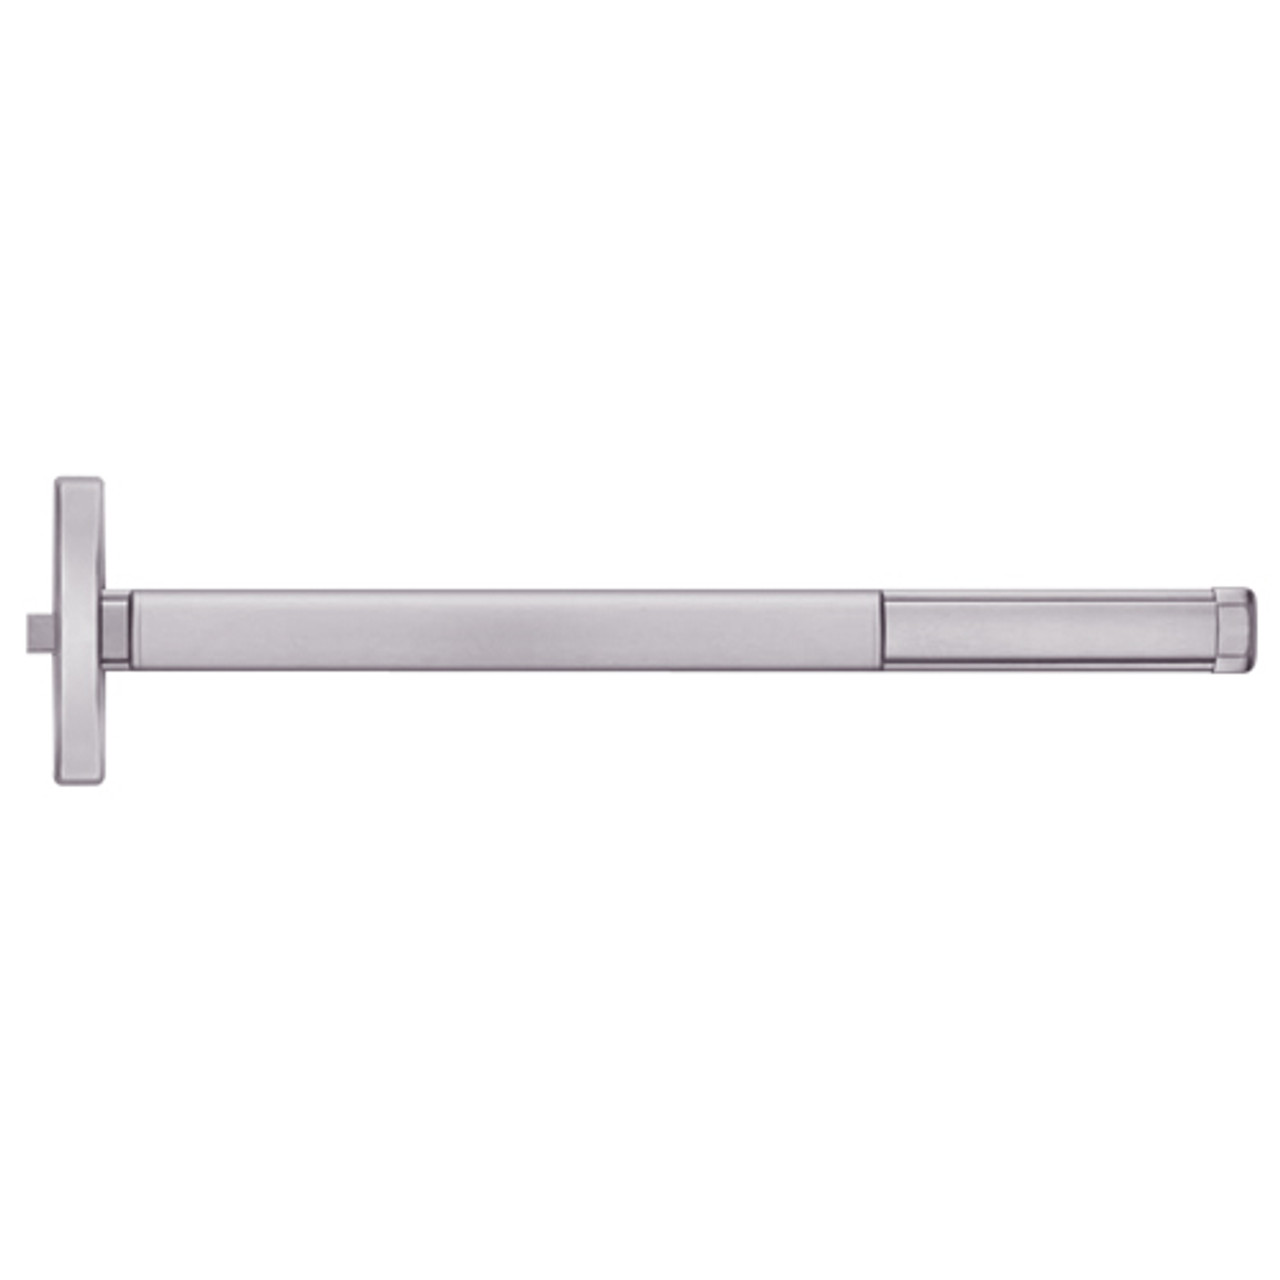 TSFL2408-630-36 PHI 2400 Series Fire Rated Apex Rim Exit Device with Touchbar Monitoring Switch Prepped for Key Controls Lever in Satin Stainless Steel Finish